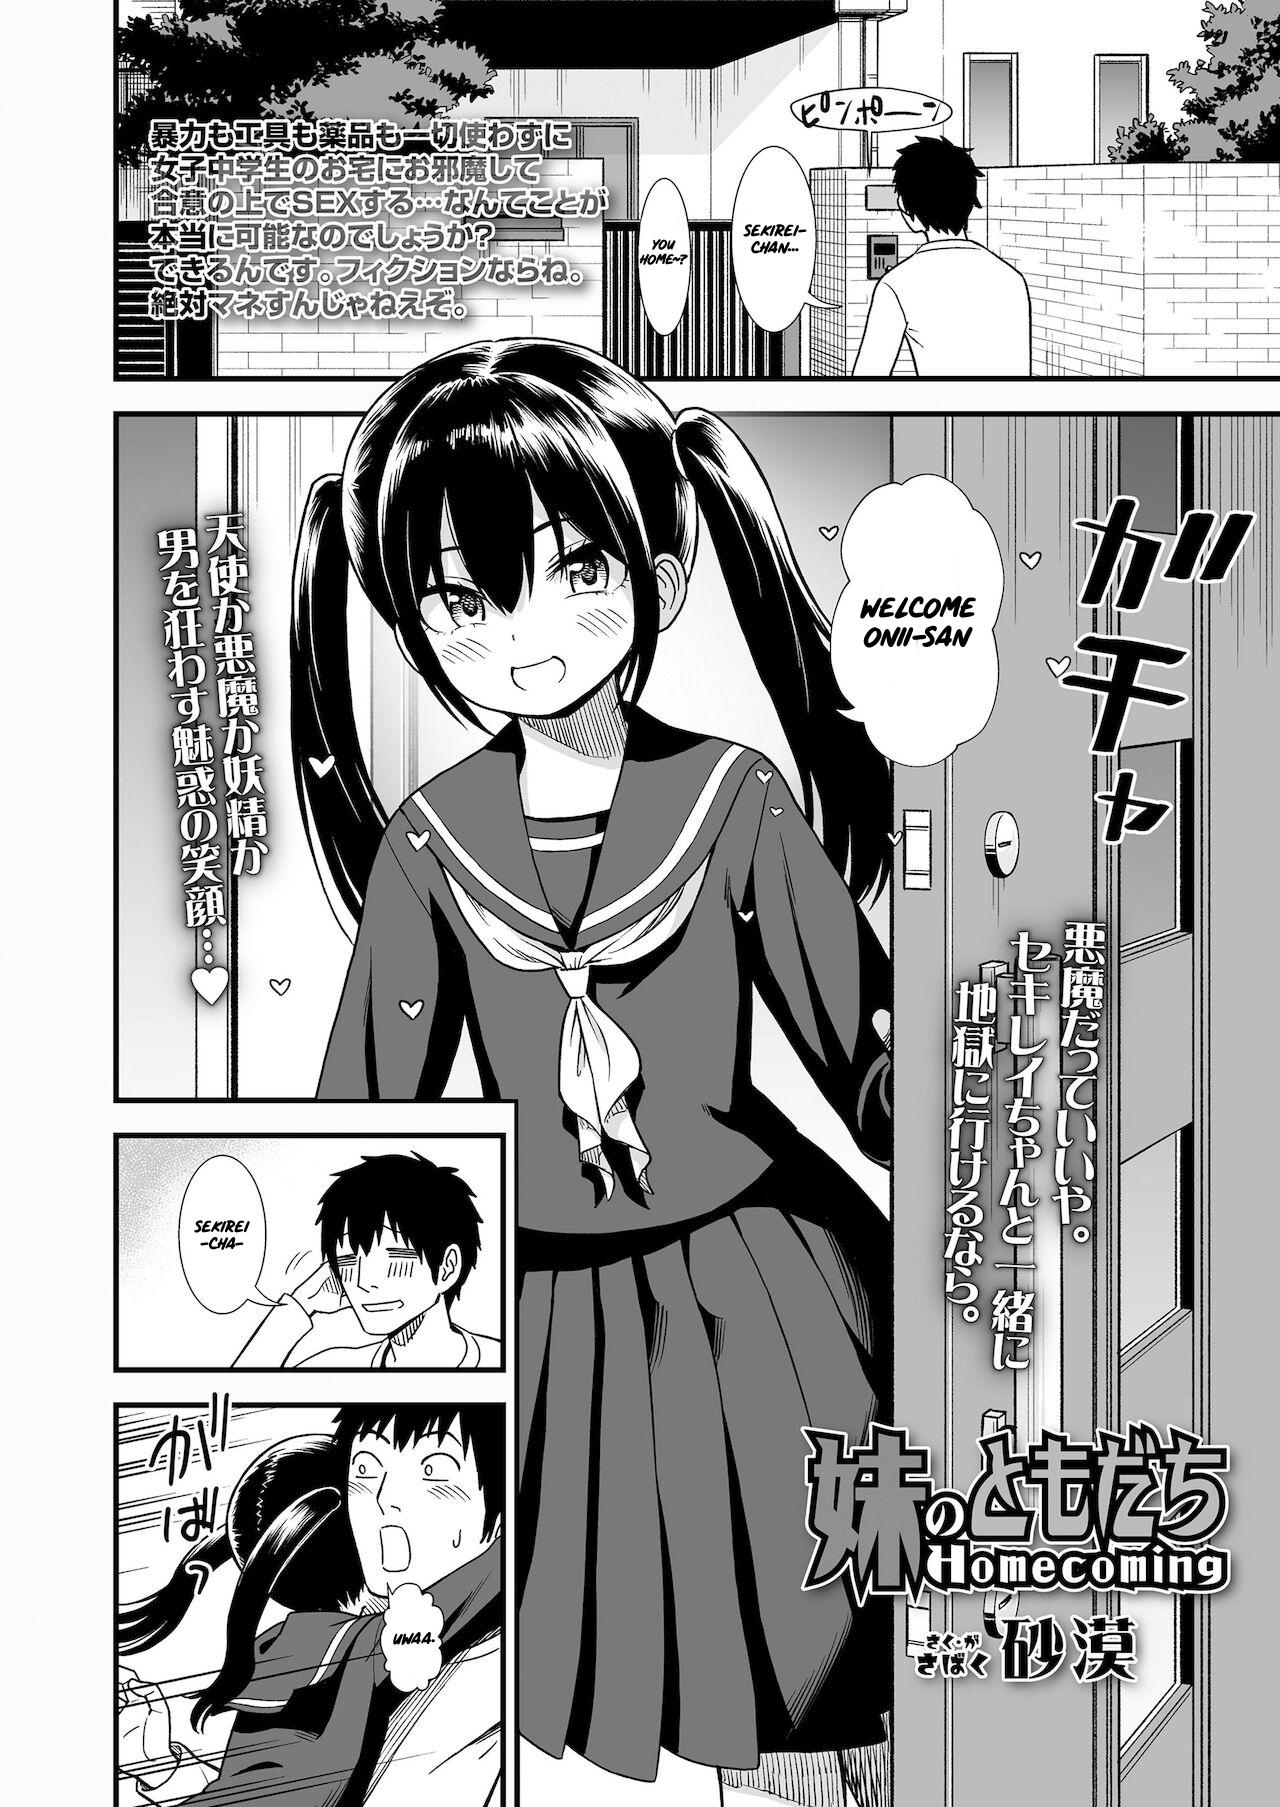 Buttplug Imouto no Tomodachi Homecoming | My Little Sister's Friend Homecoming Chile - Page 2